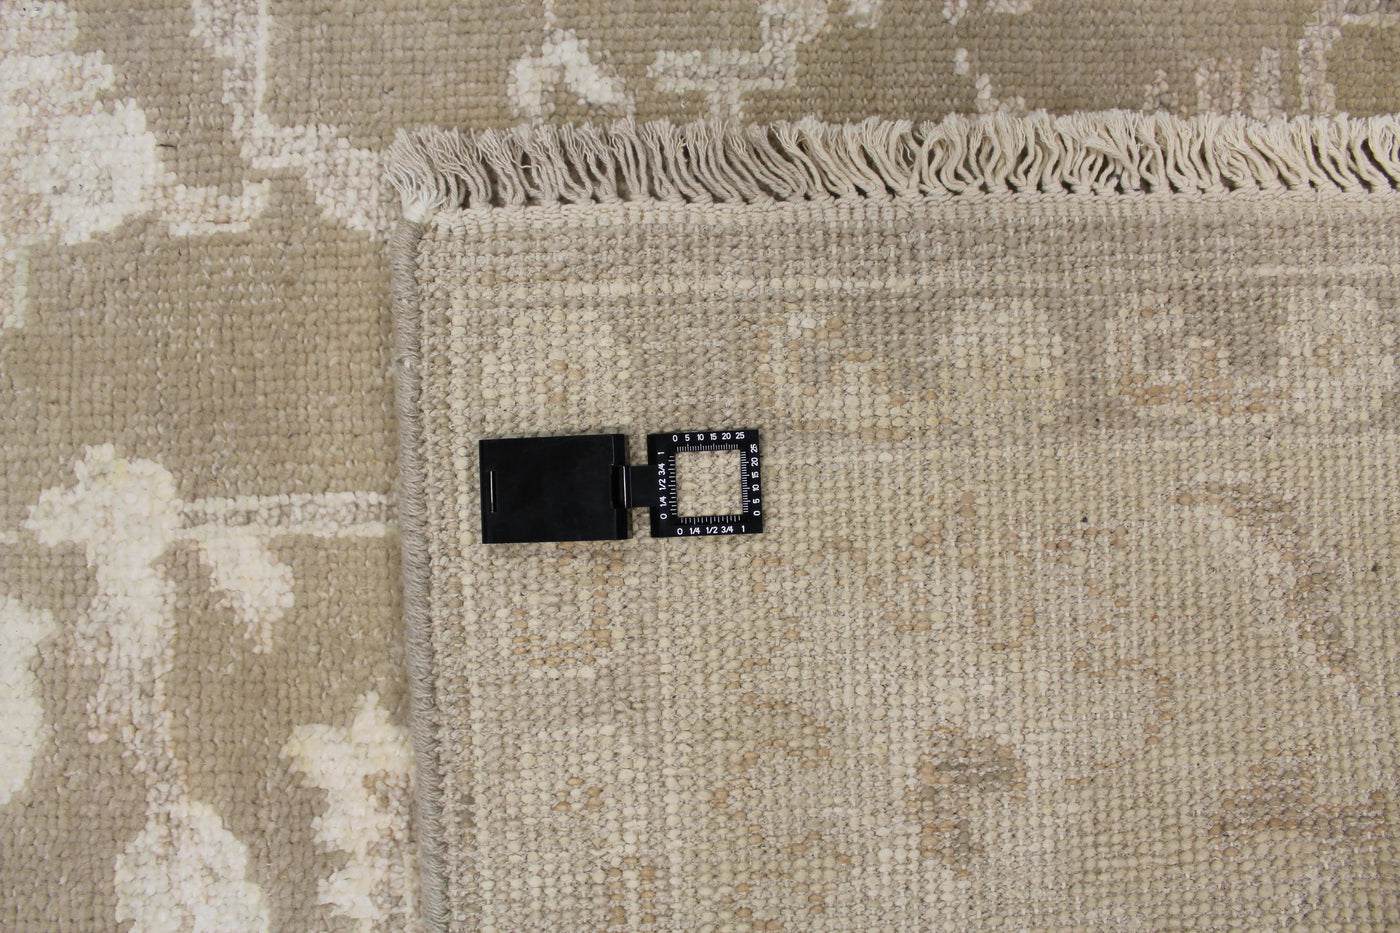 Canvello Hand Made Transitional All Over Indo Oushak Rug - 8'1'' X 9'11''